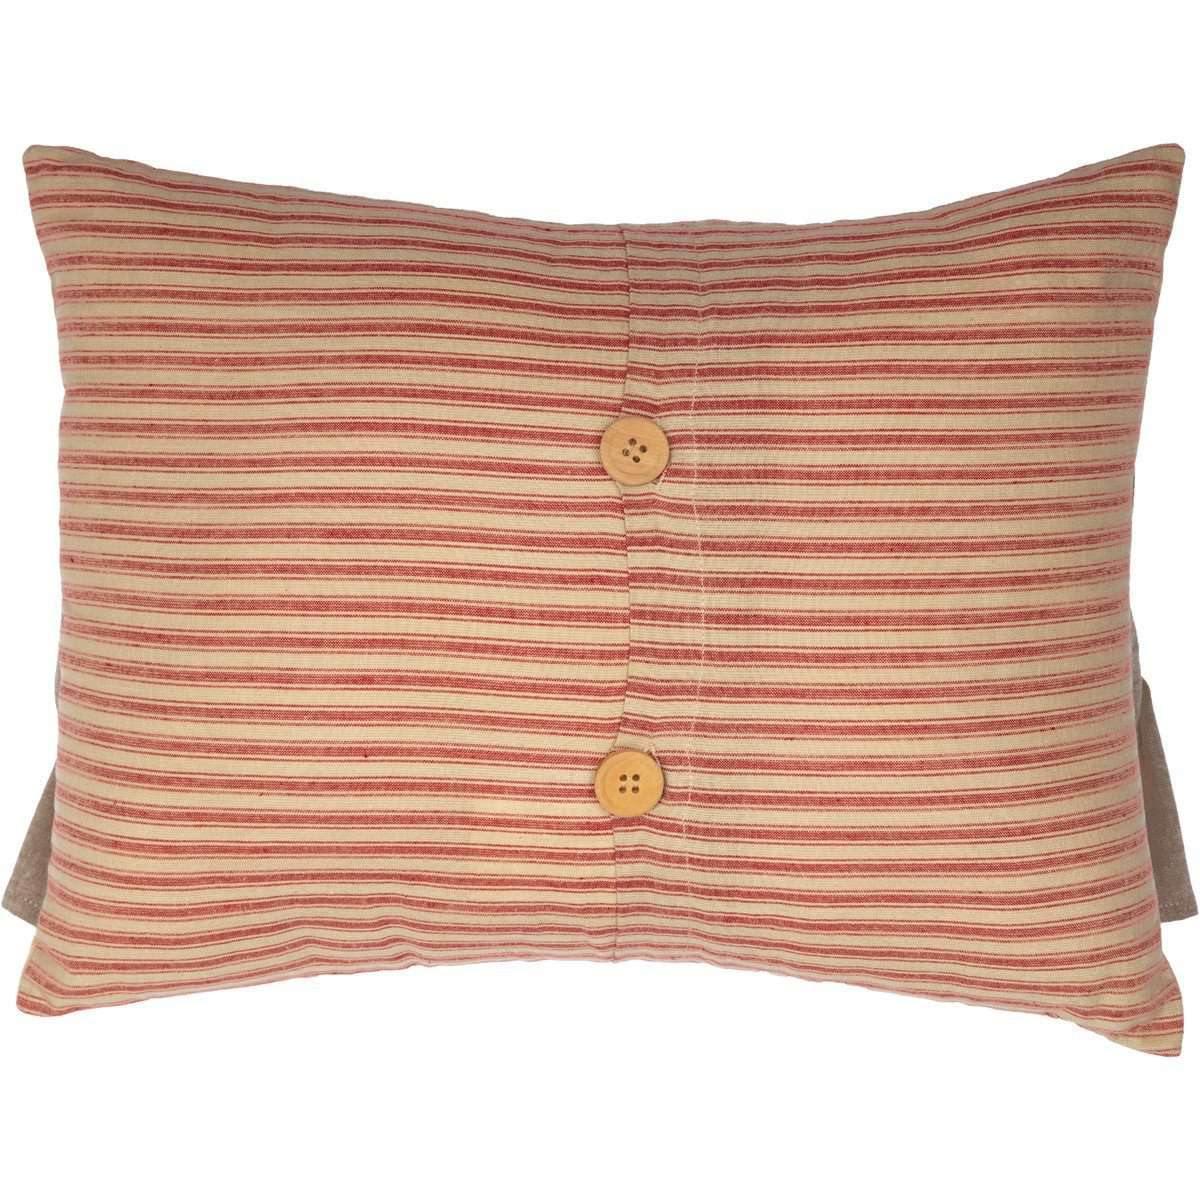 Rory Schoolhouse Red Ruffled Pillow 14x18 VHC Brands back